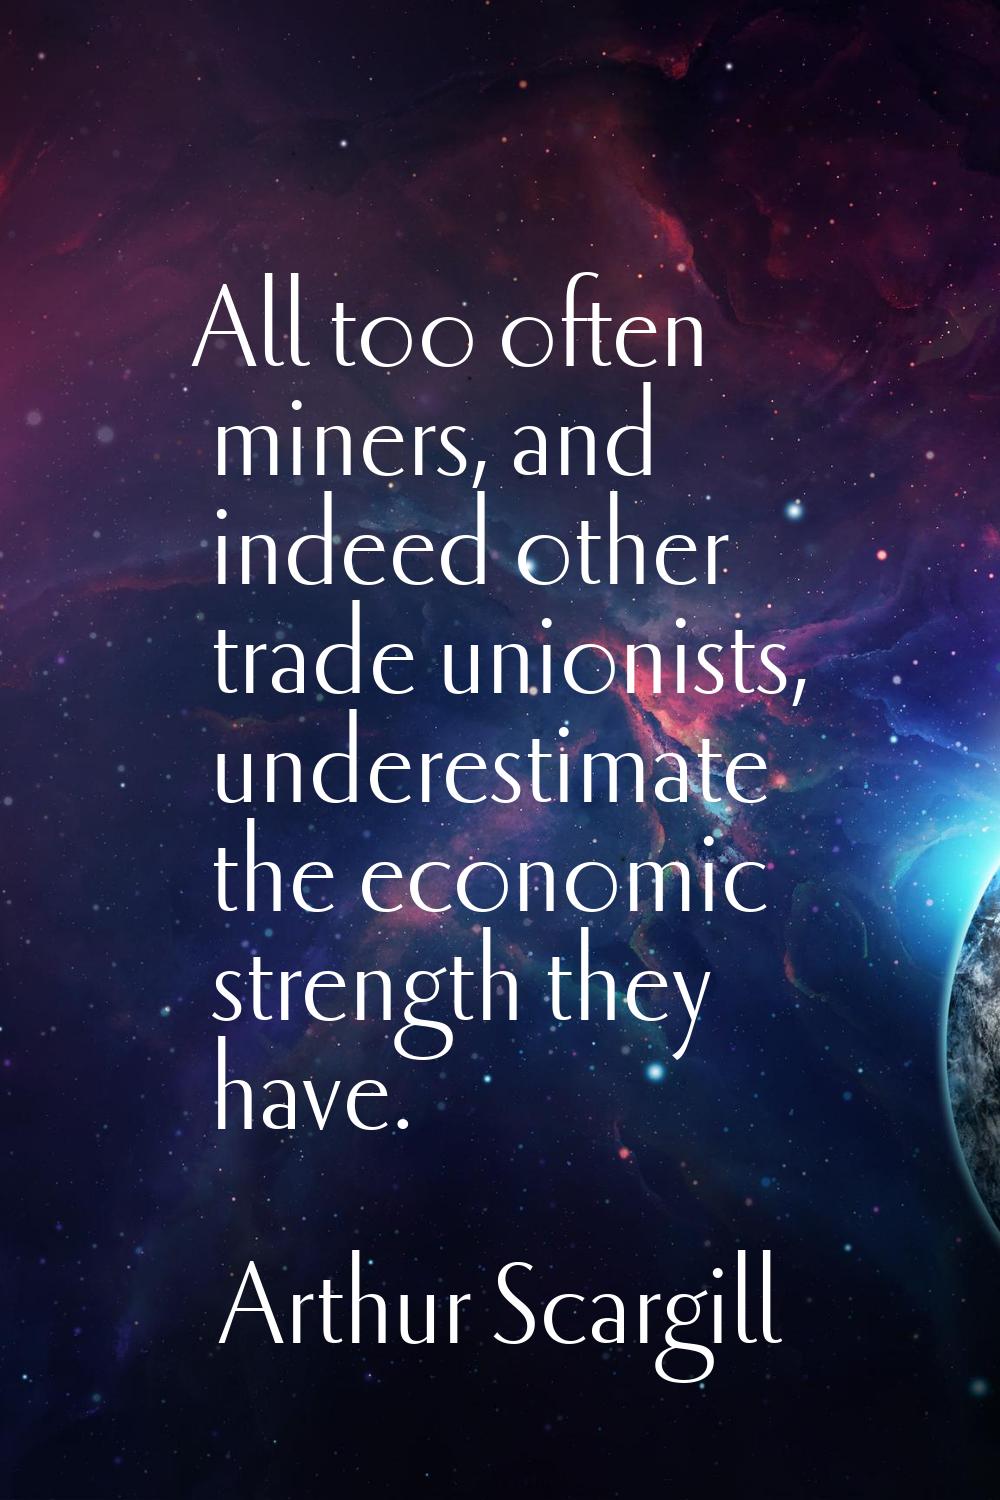 All too often miners, and indeed other trade unionists, underestimate the economic strength they ha